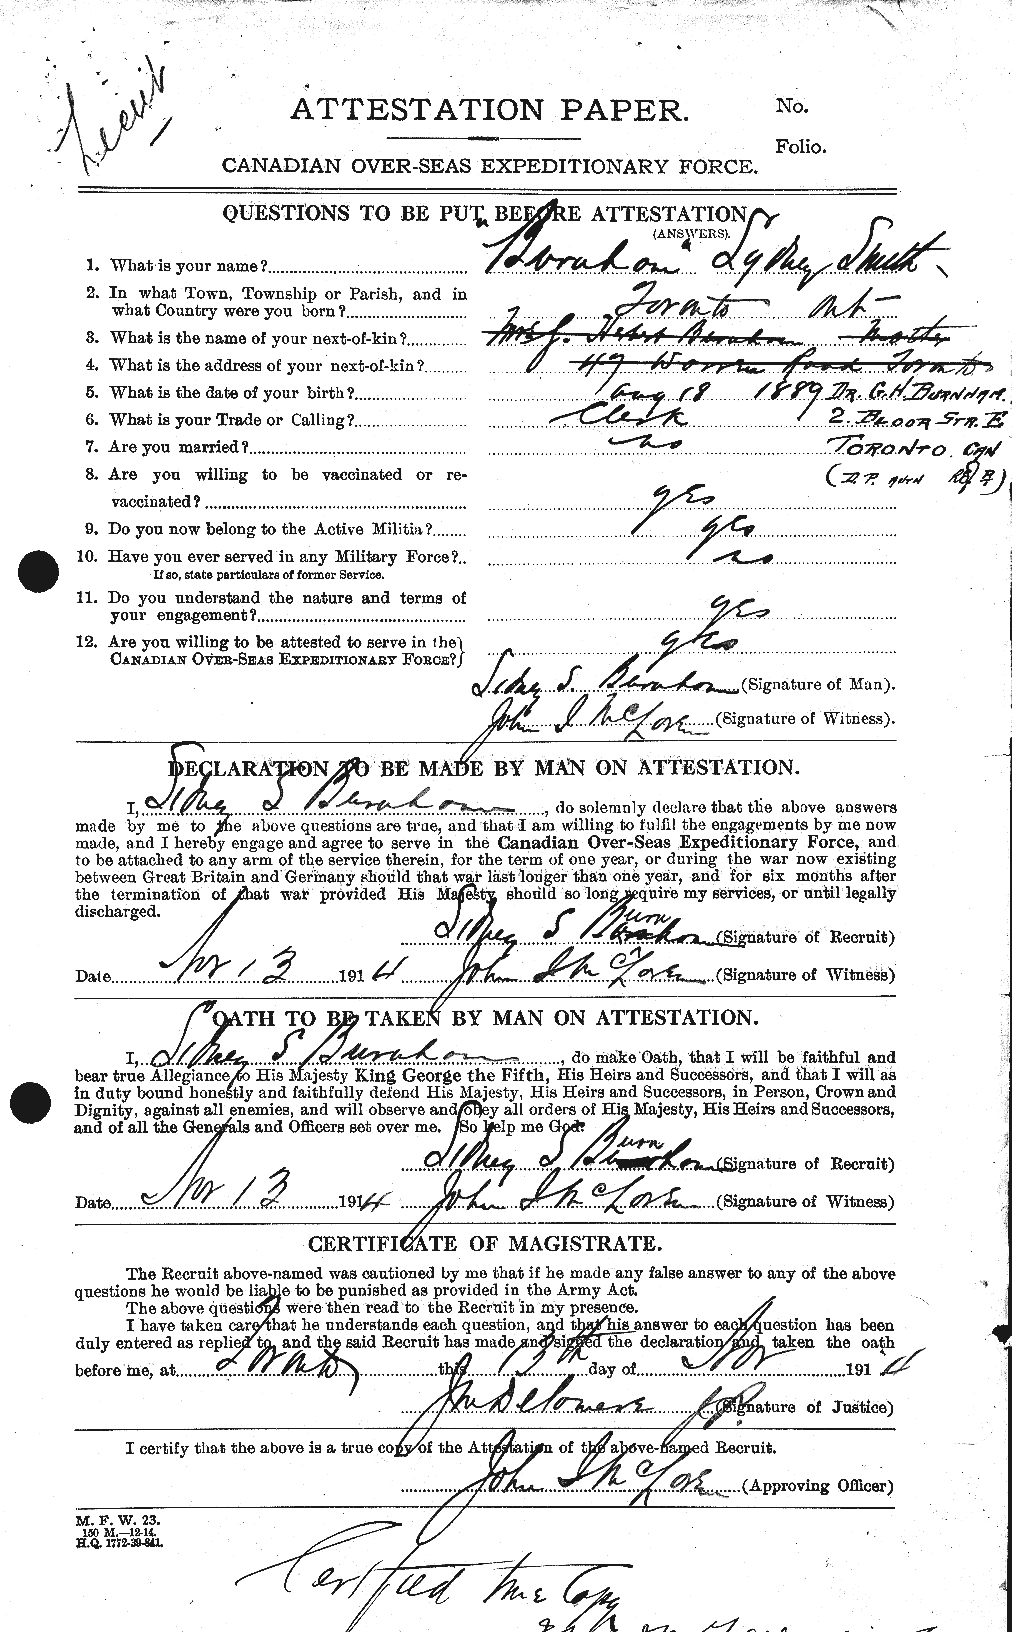 Personnel Records of the First World War - CEF 273712a